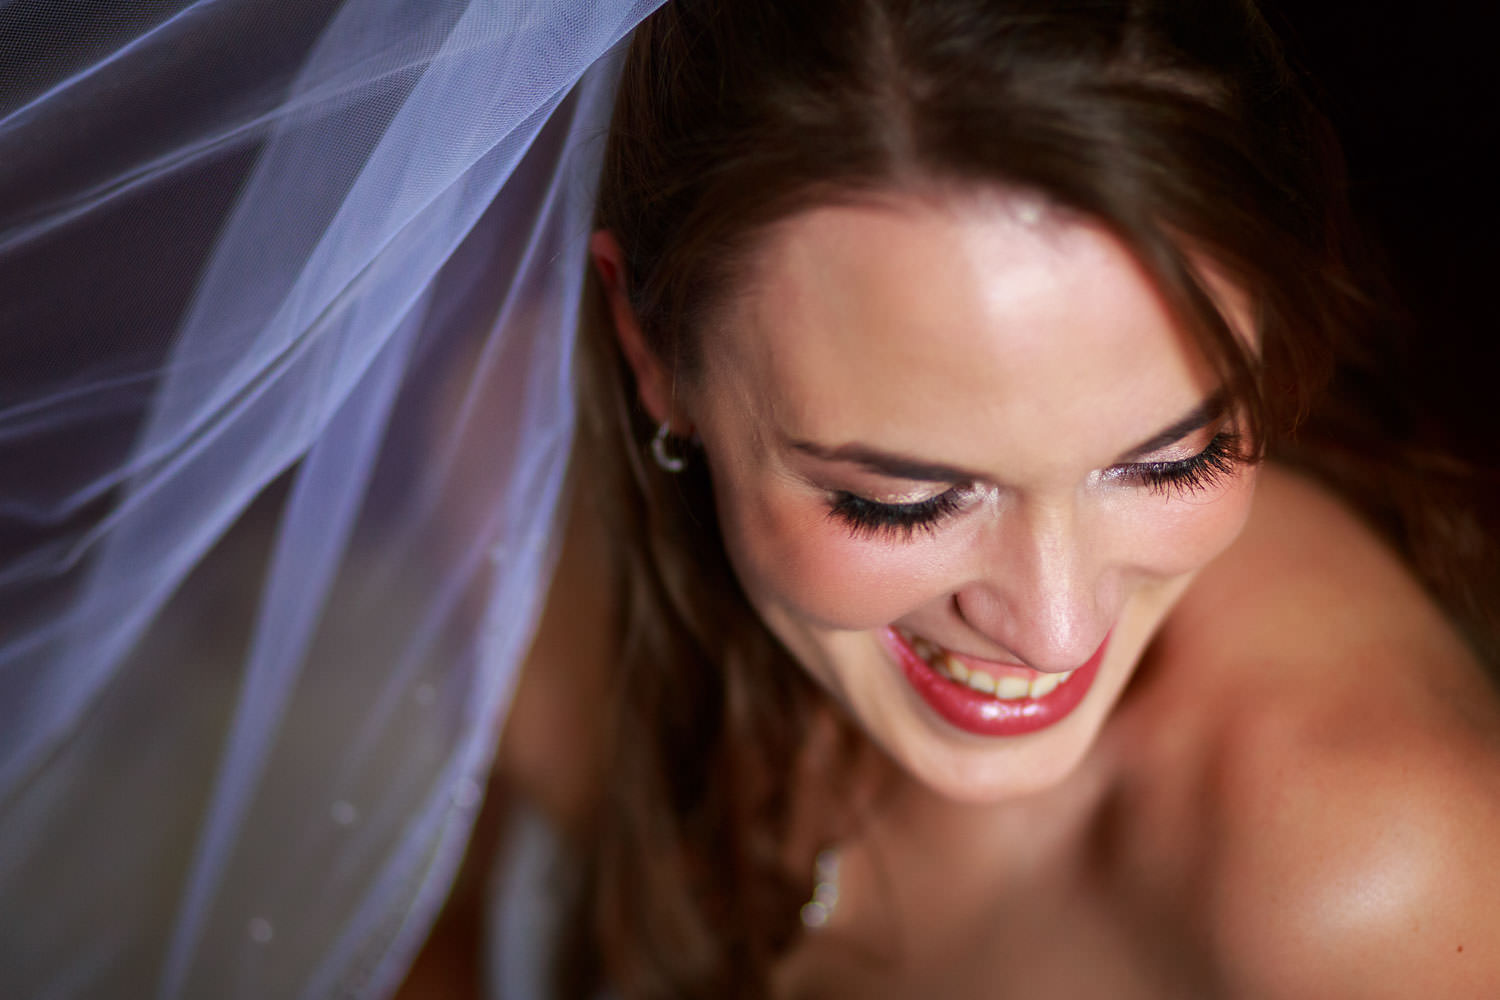 Wedding day portrait of a happy smiling bride. The veil in the background with soft window light streaming onto the bride